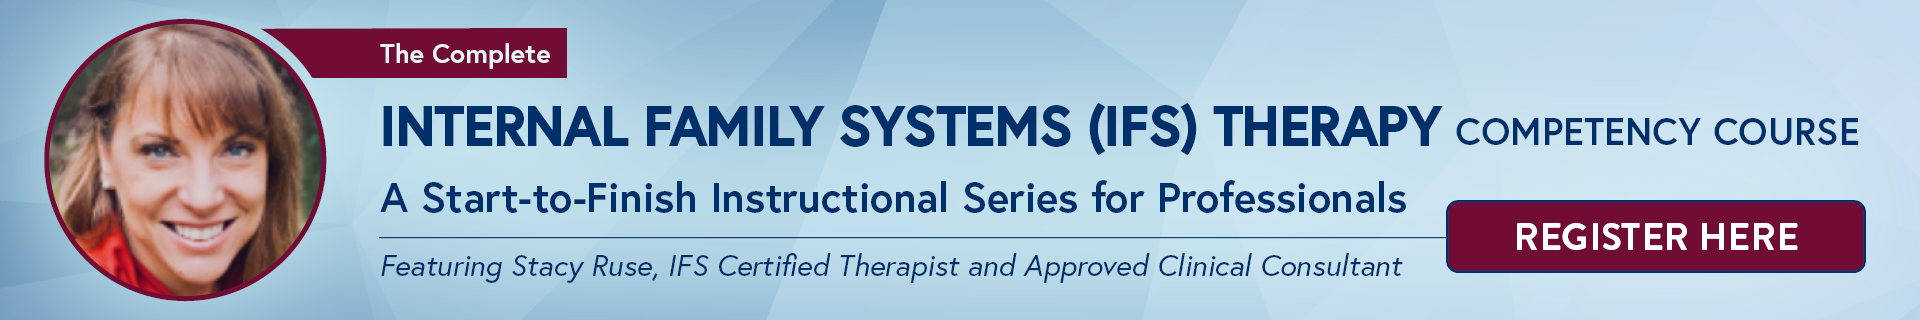 The Complete Internal Family Systems (IFS) Therapy Competency Course